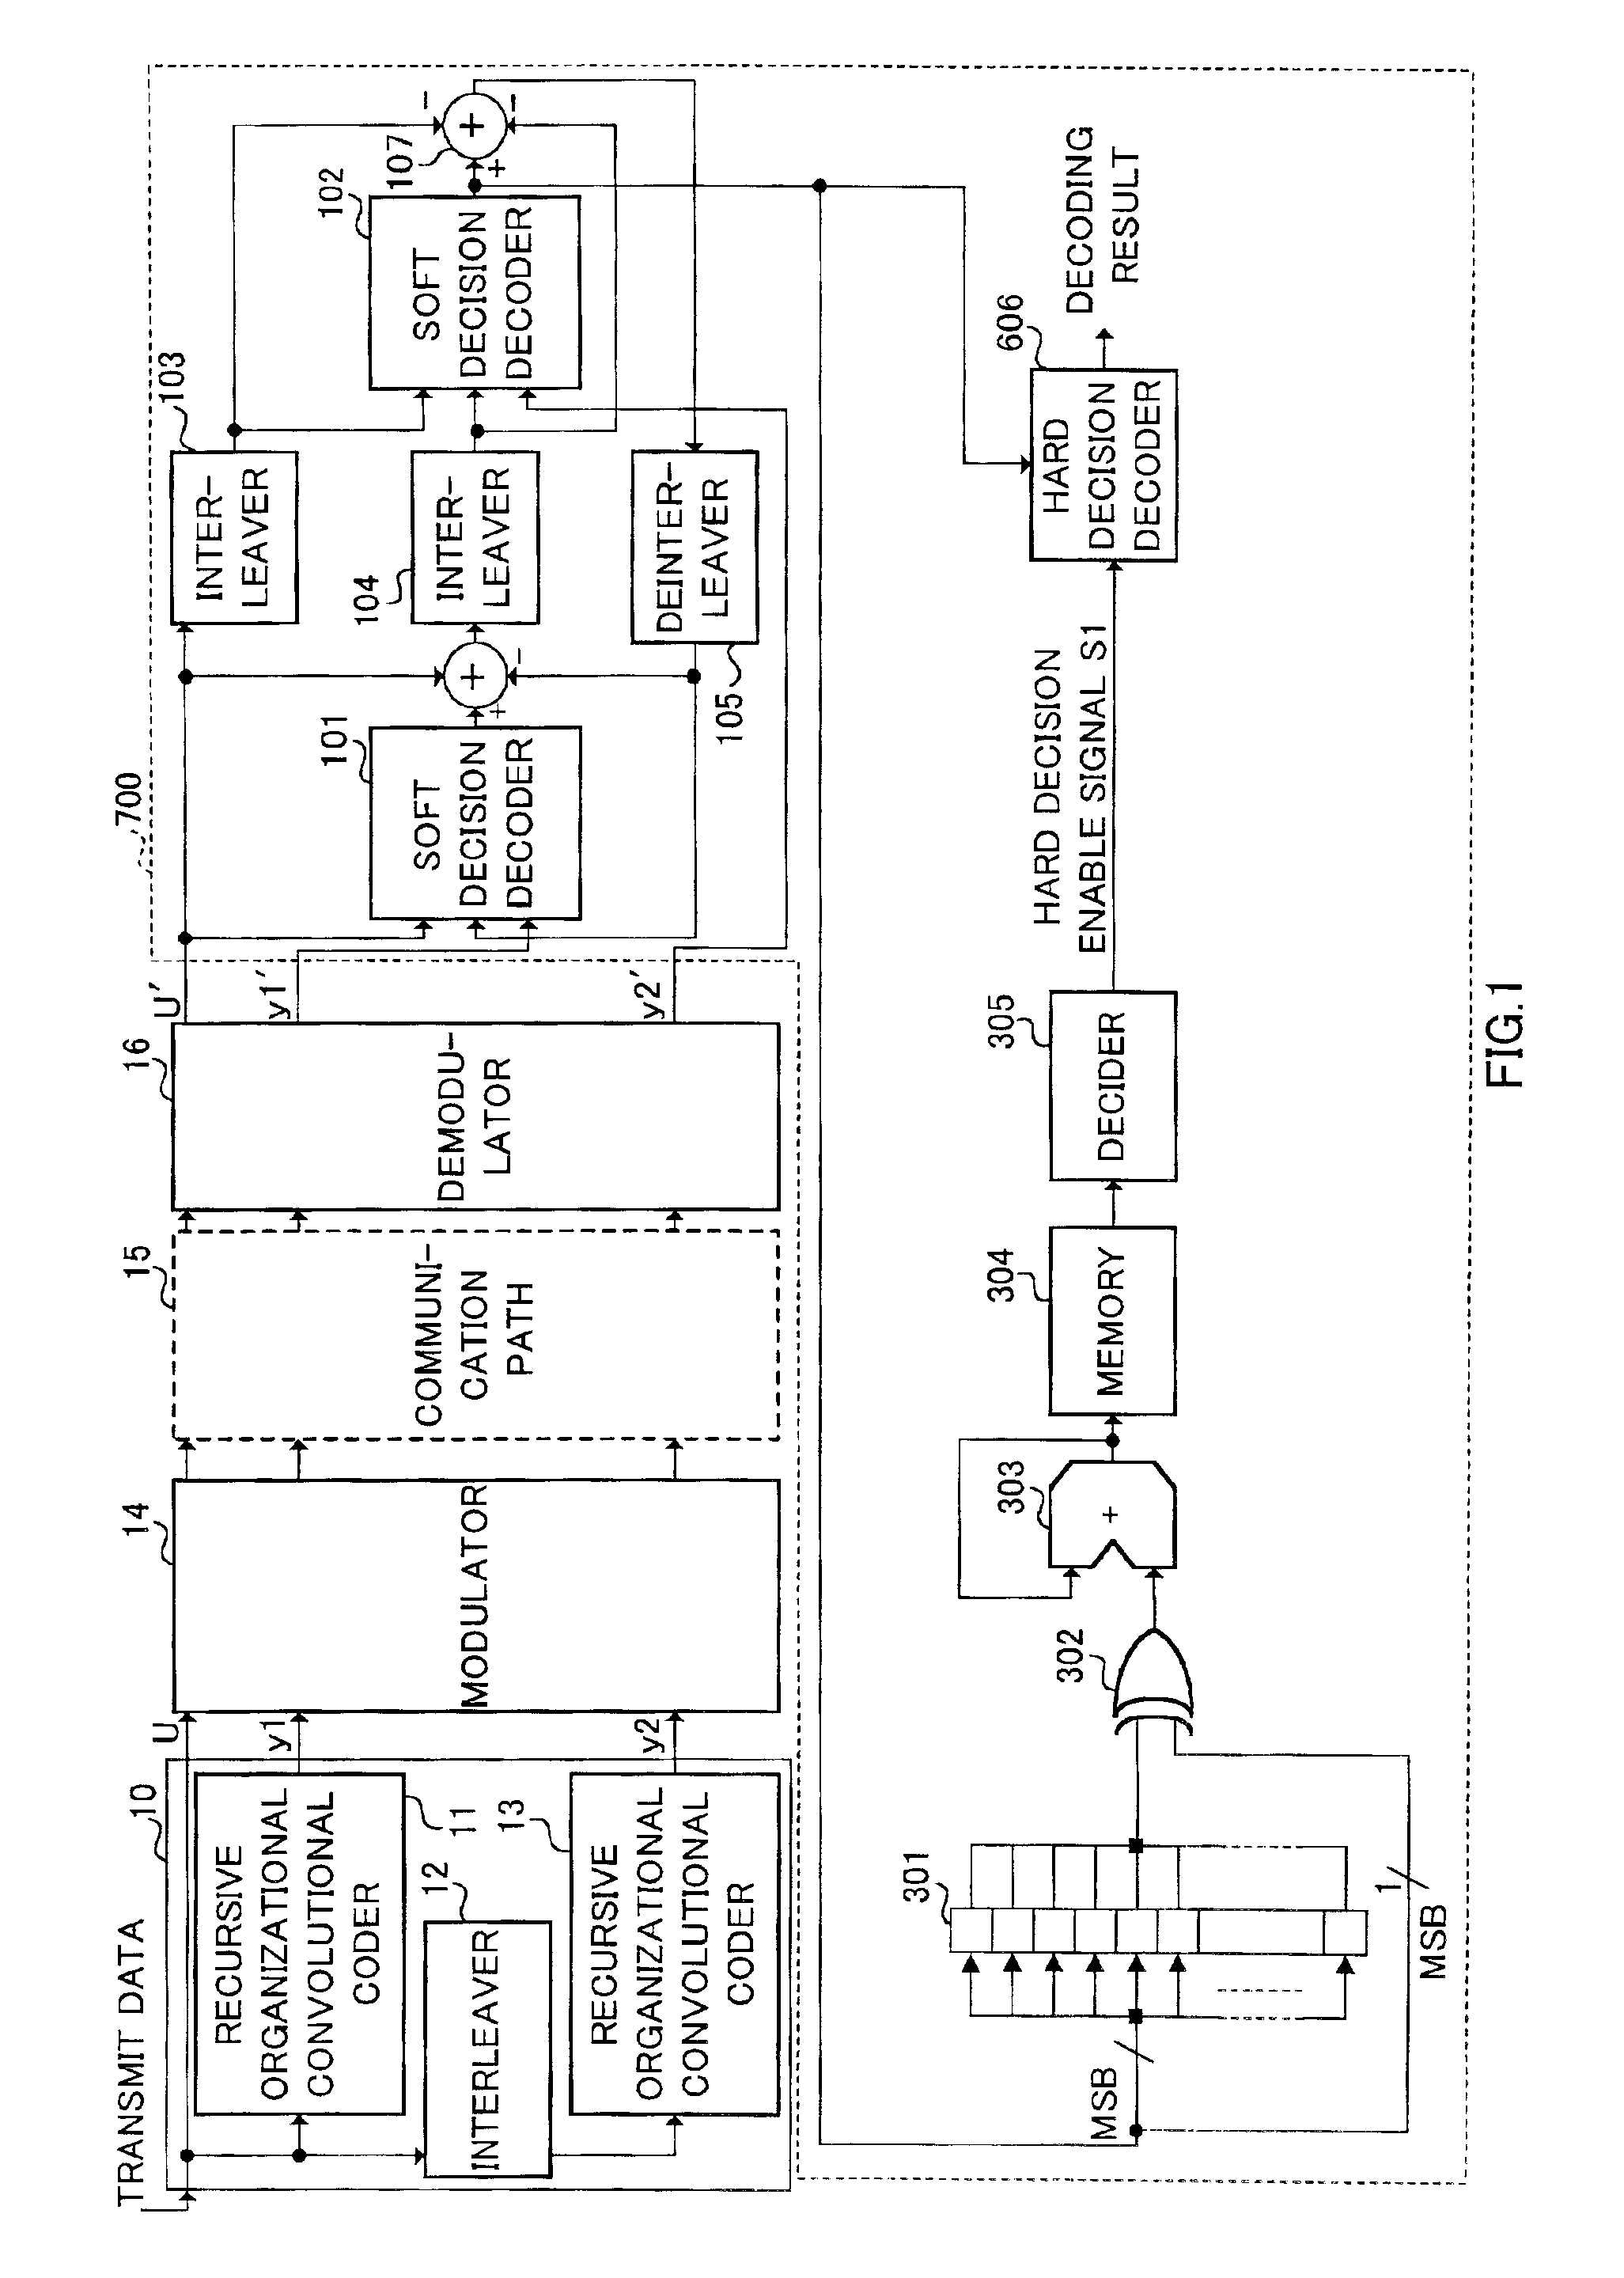 Turbo decoding apparatus and decoding iteration count controlling method in turbo decoding